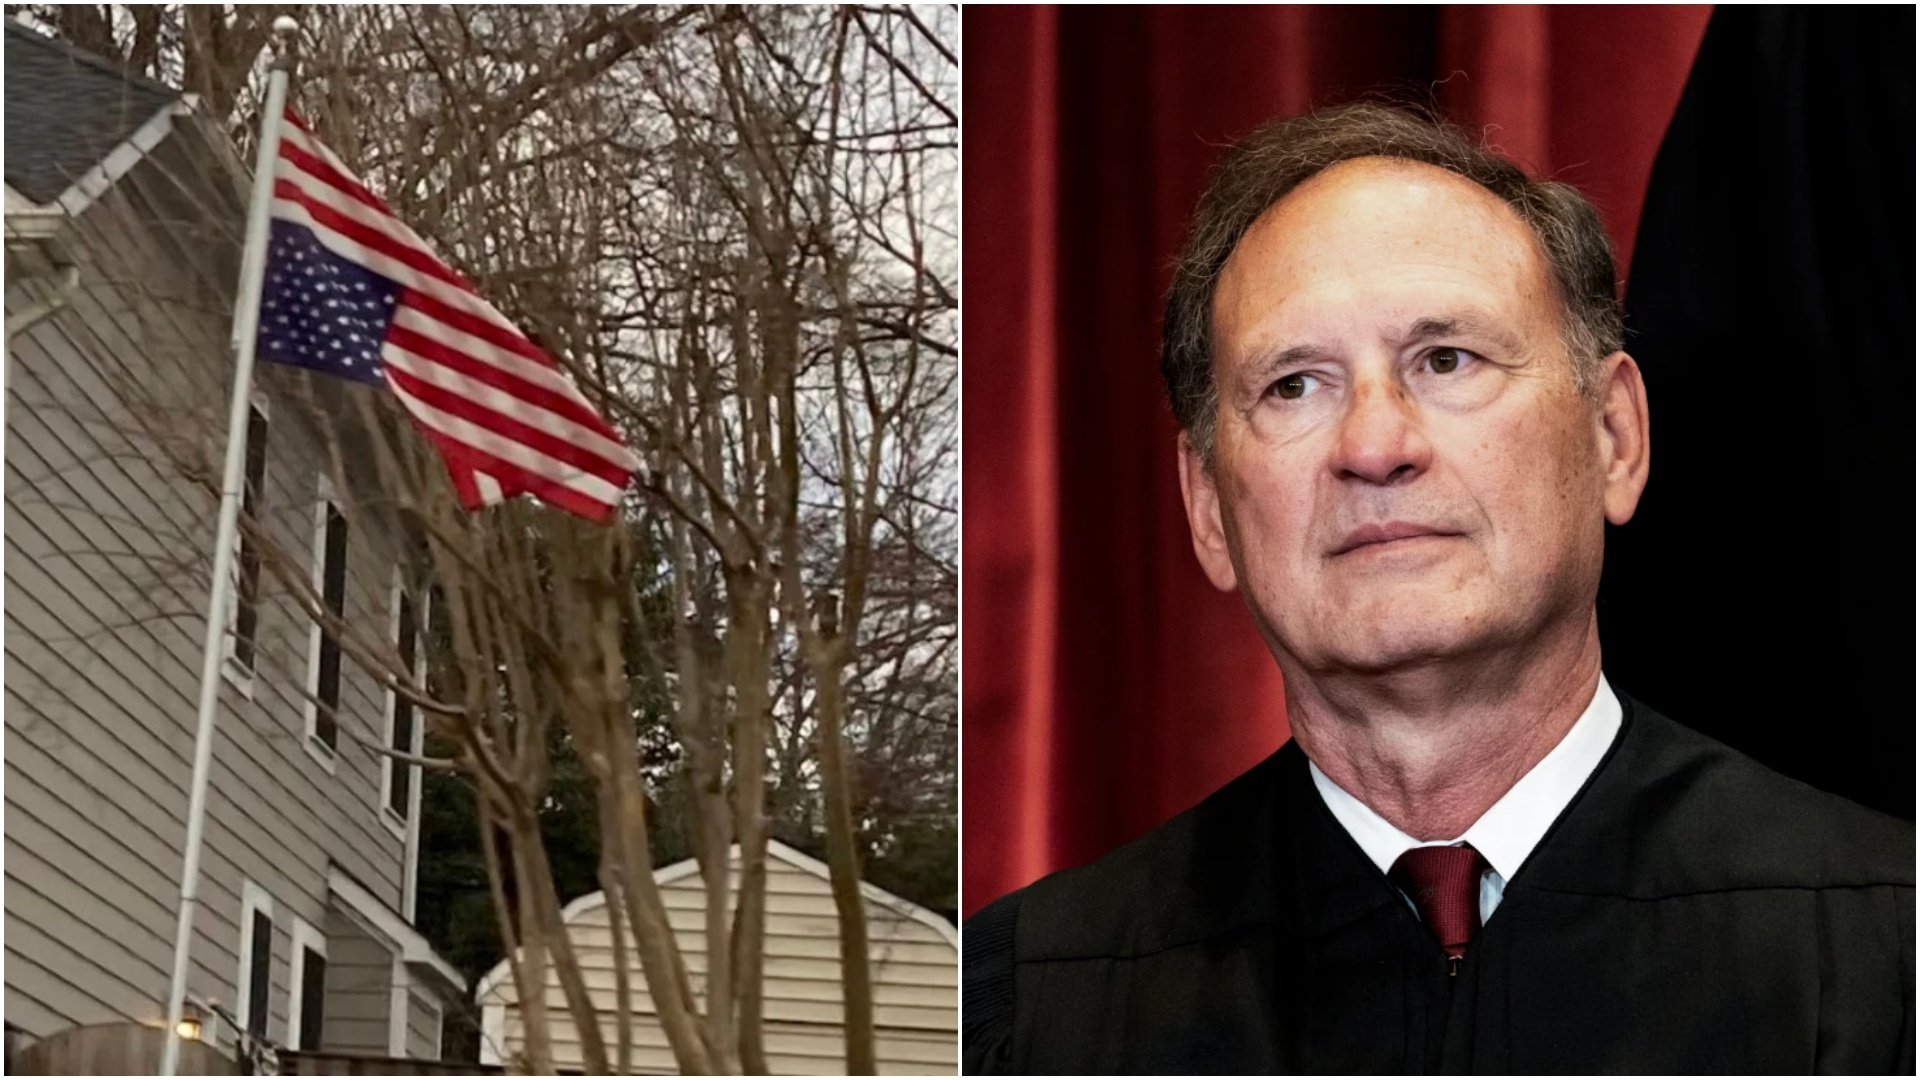 Supreme Court Justice Samuel Alito accused of flying the flag upside down in protest of the stolen 2020 presidential election |  The Gateway expert